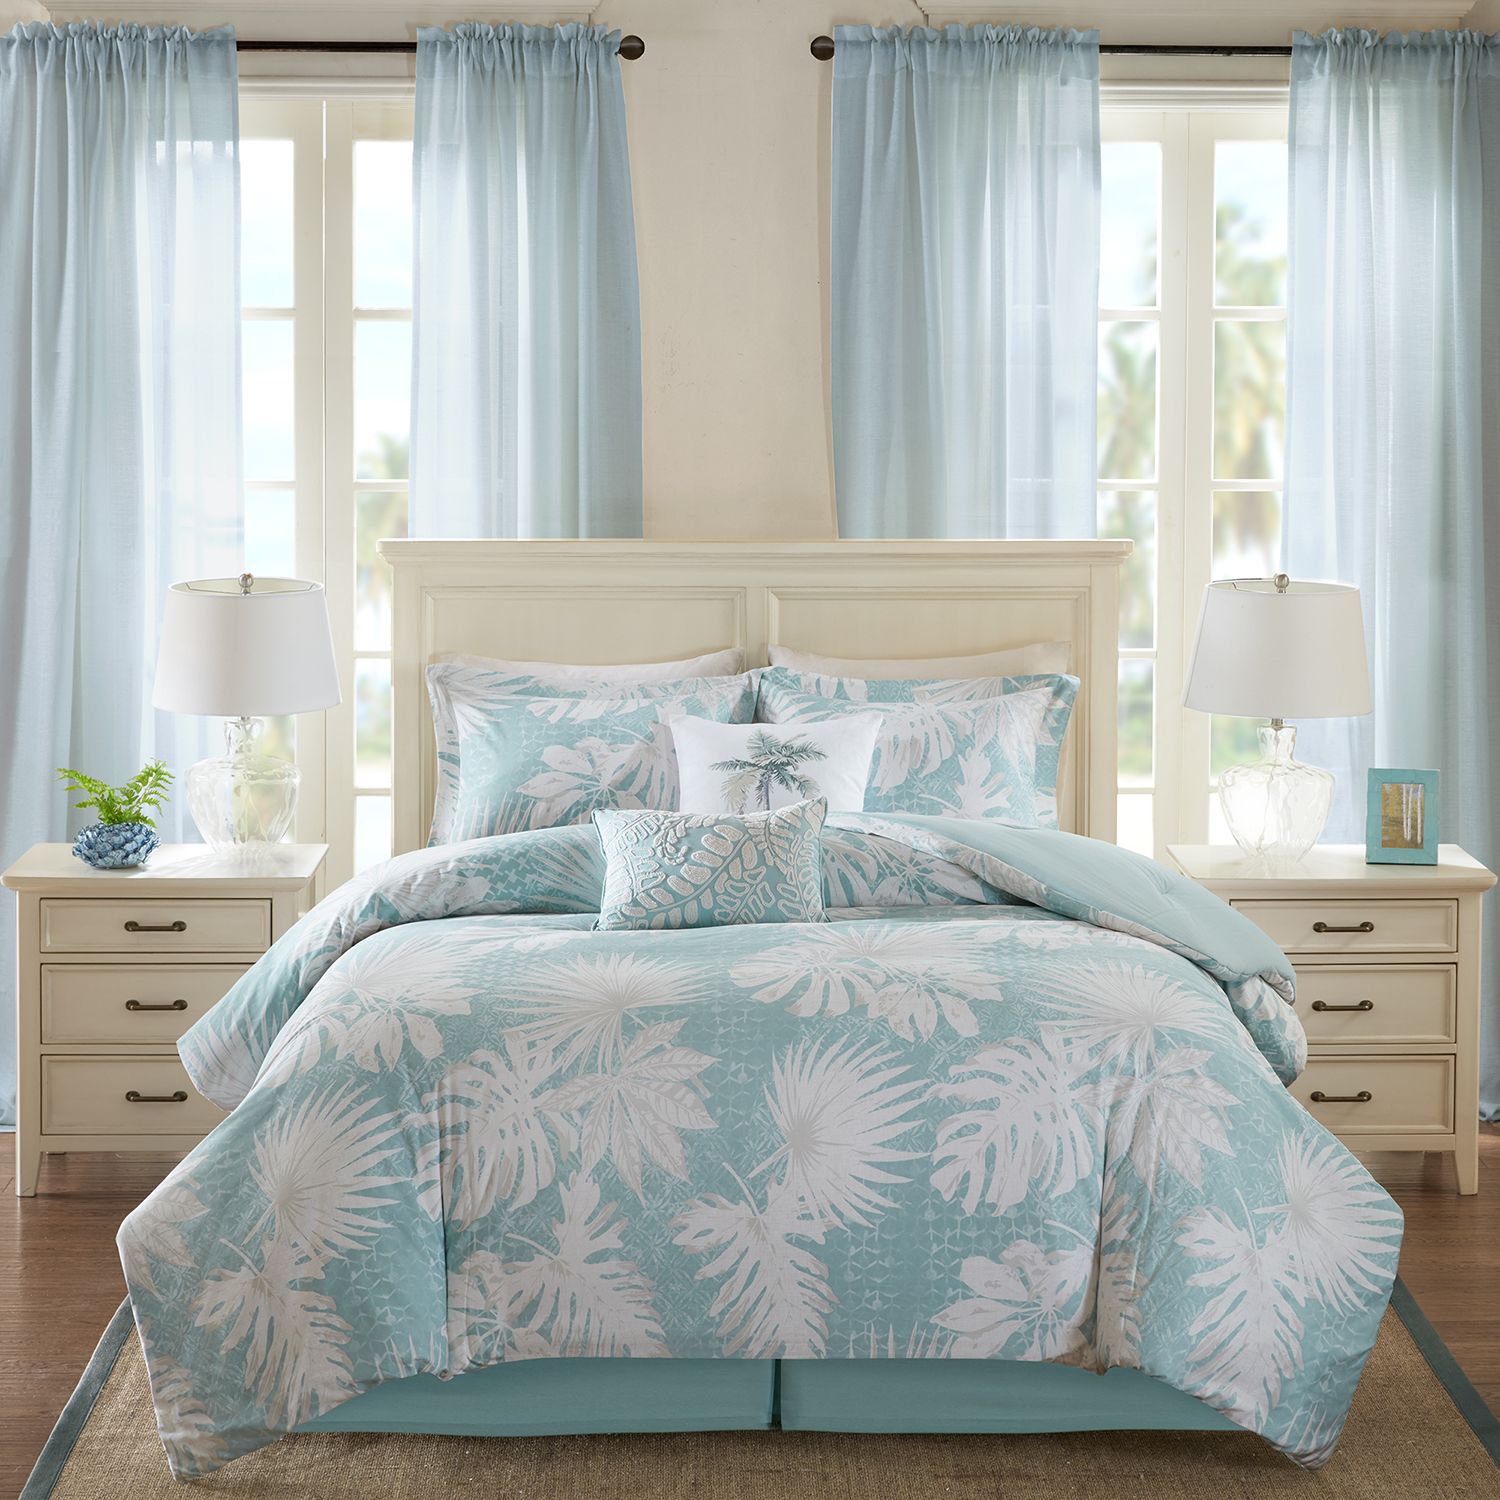 Image for Harbor House Palm Grove Comforter Set at Kohl's.